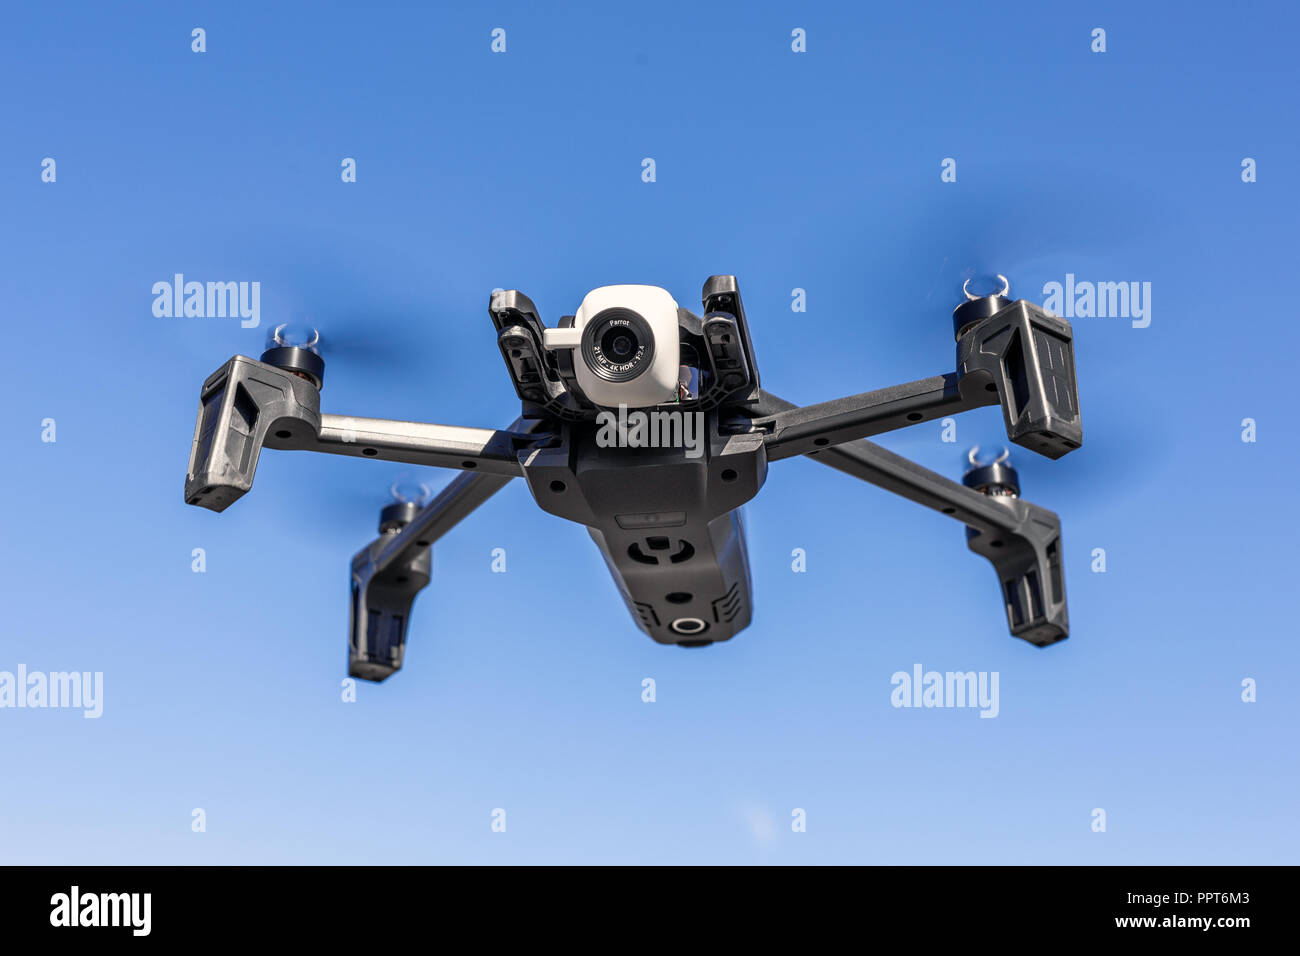 26th October 2018 - Kiev,Ukraine: New 2018 Parrot anafi drone flying  against blue clear sky on background on bright sunny day. Dji competitor UAV.  21 Stock Photo - Alamy